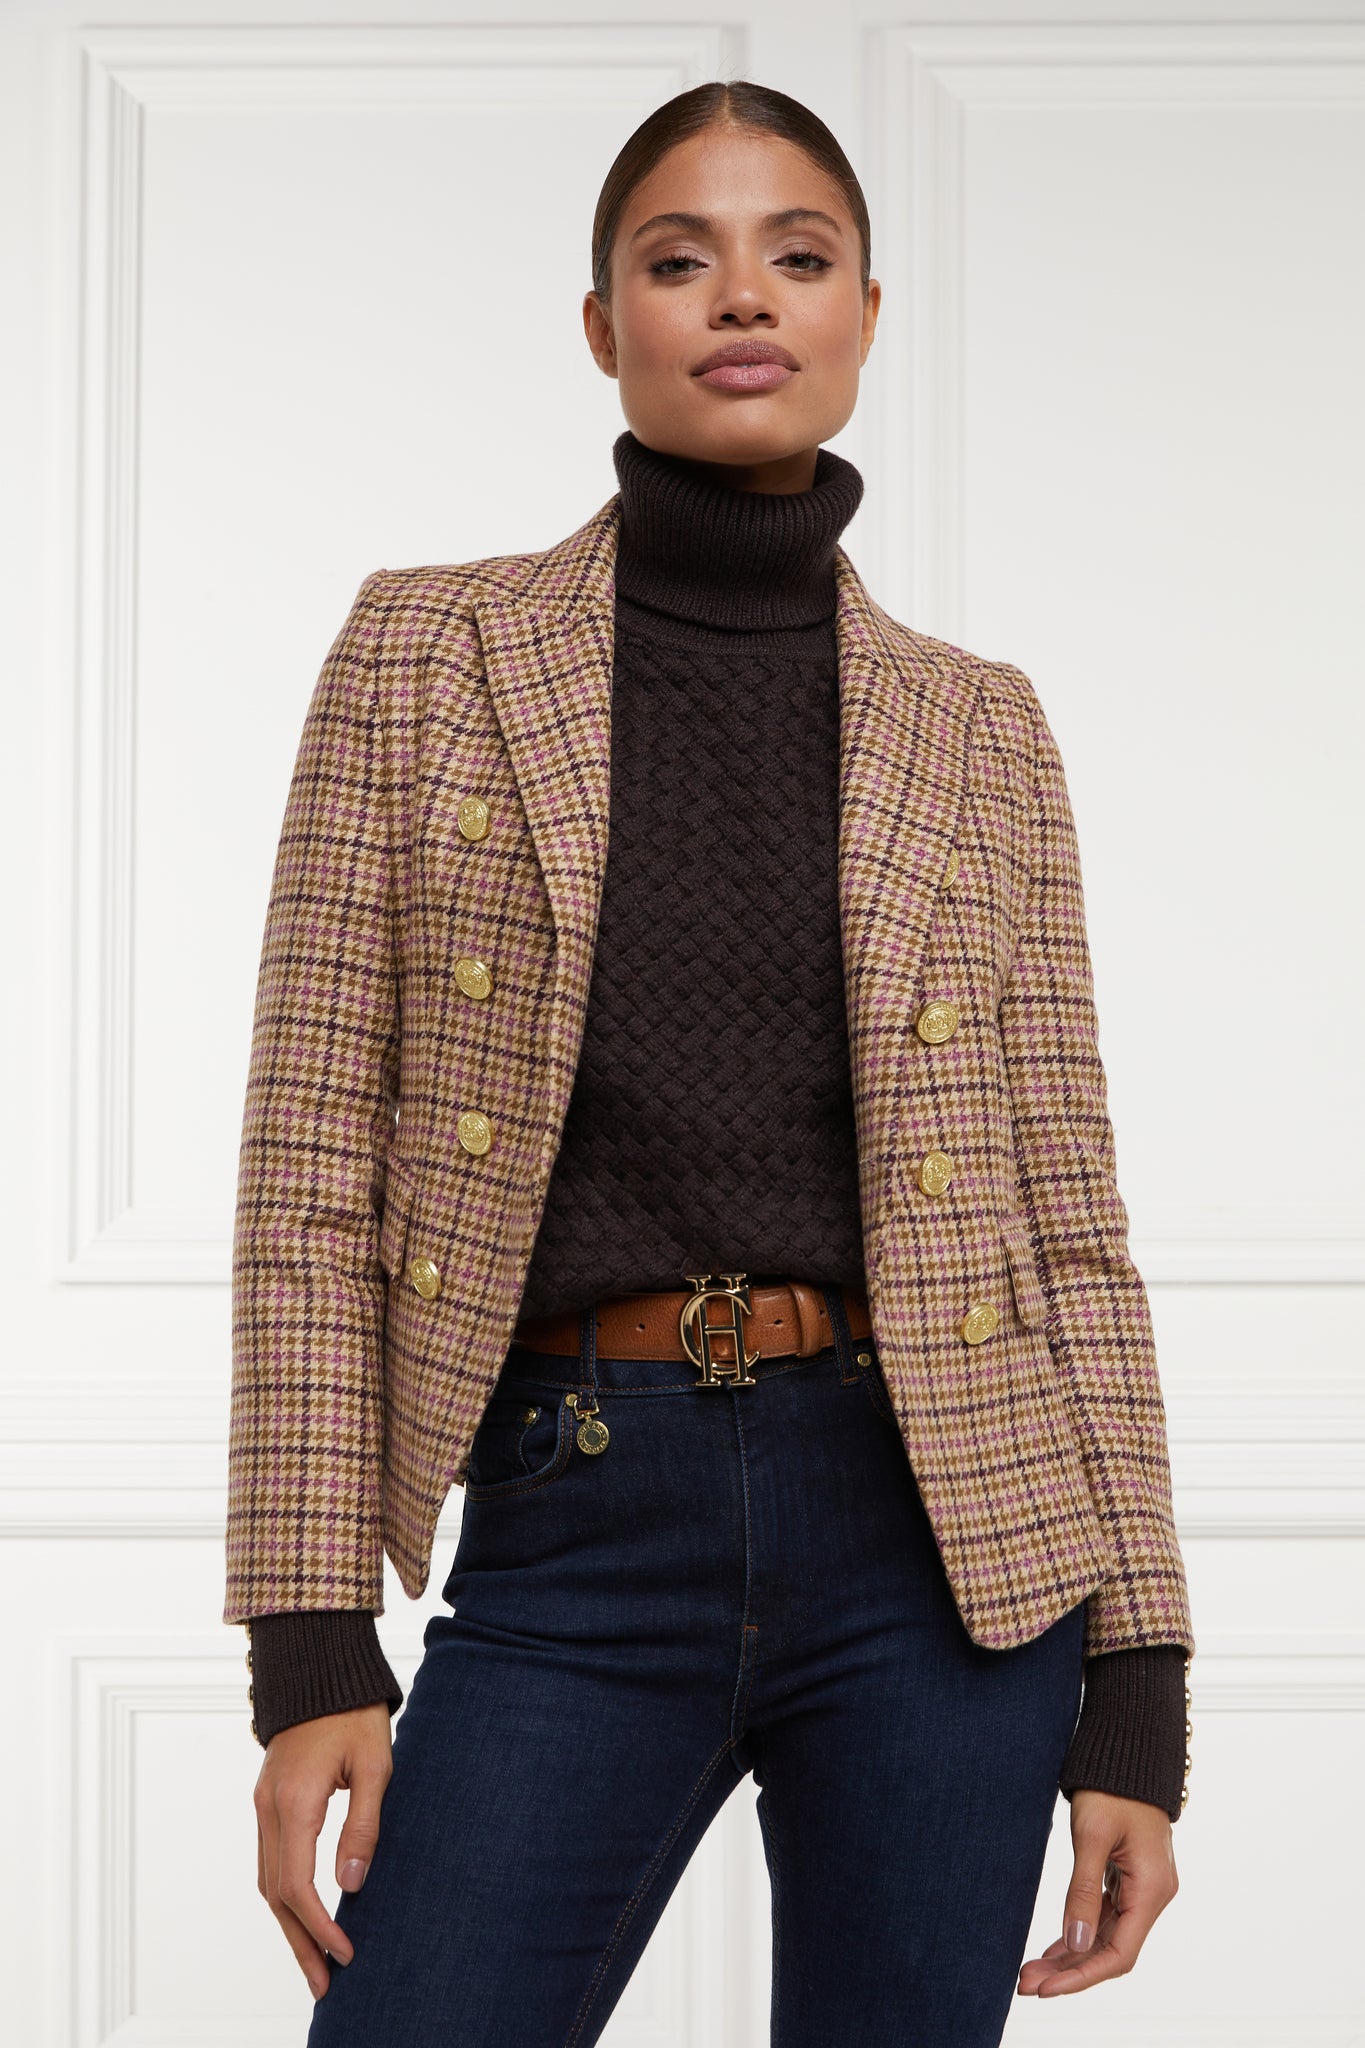 British made double breasted blazer that fastens with a single button hole to create a more form fitting silhouette with two pockets and gold button detailing this blazer is made from pink purple and brown check houndstooth fabric